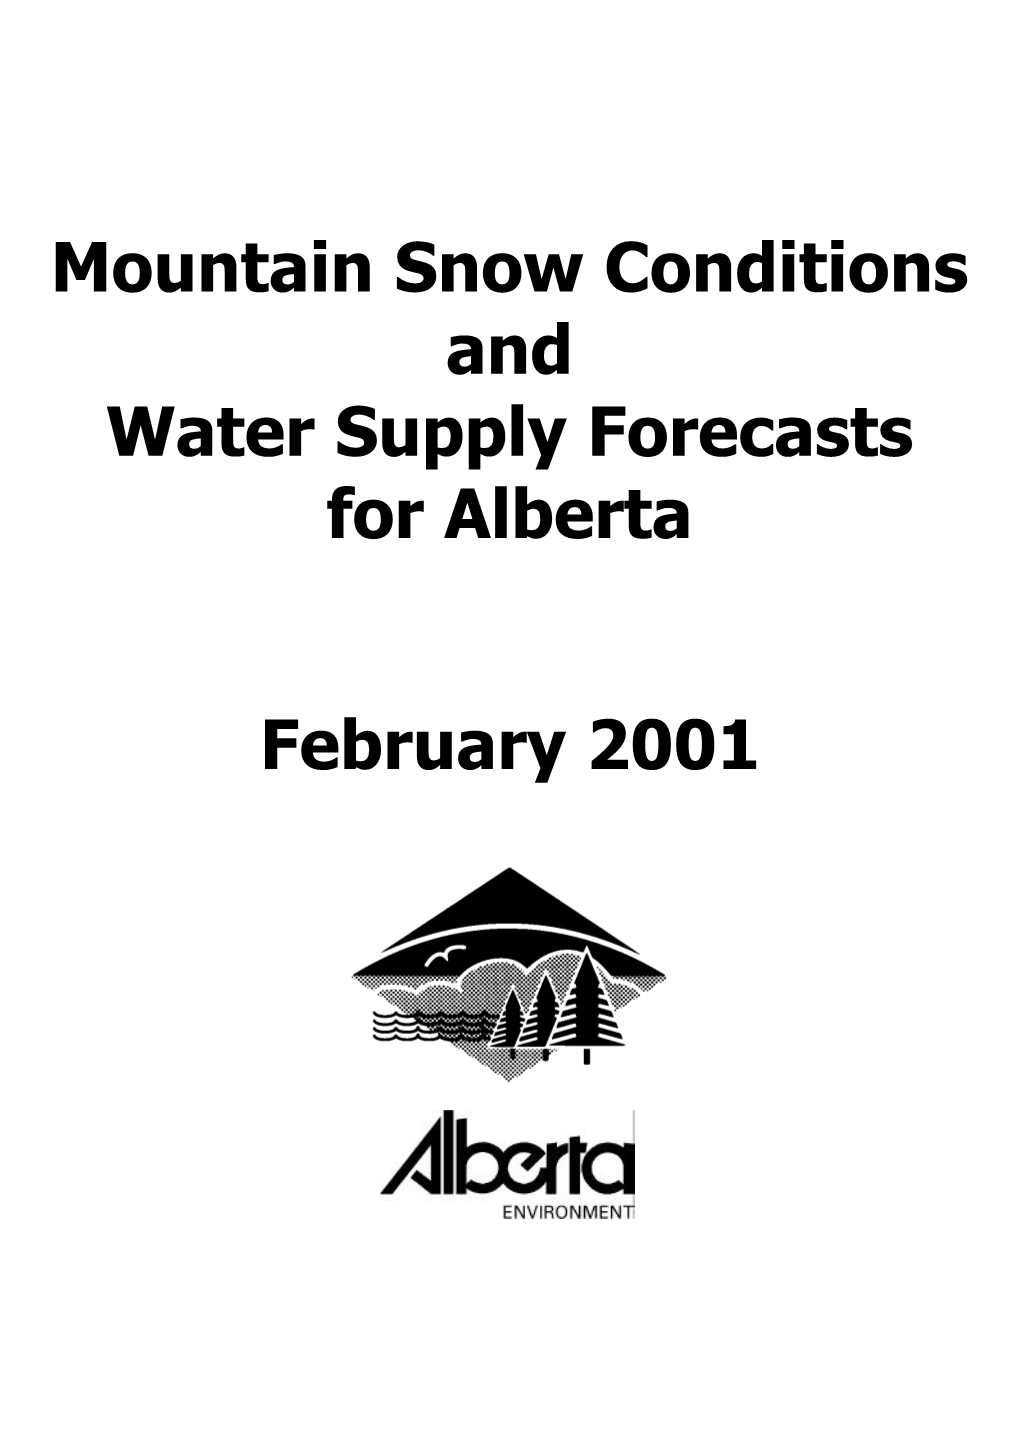 Mountain Snow Conditions and Water Supply Forecasts for Alberta